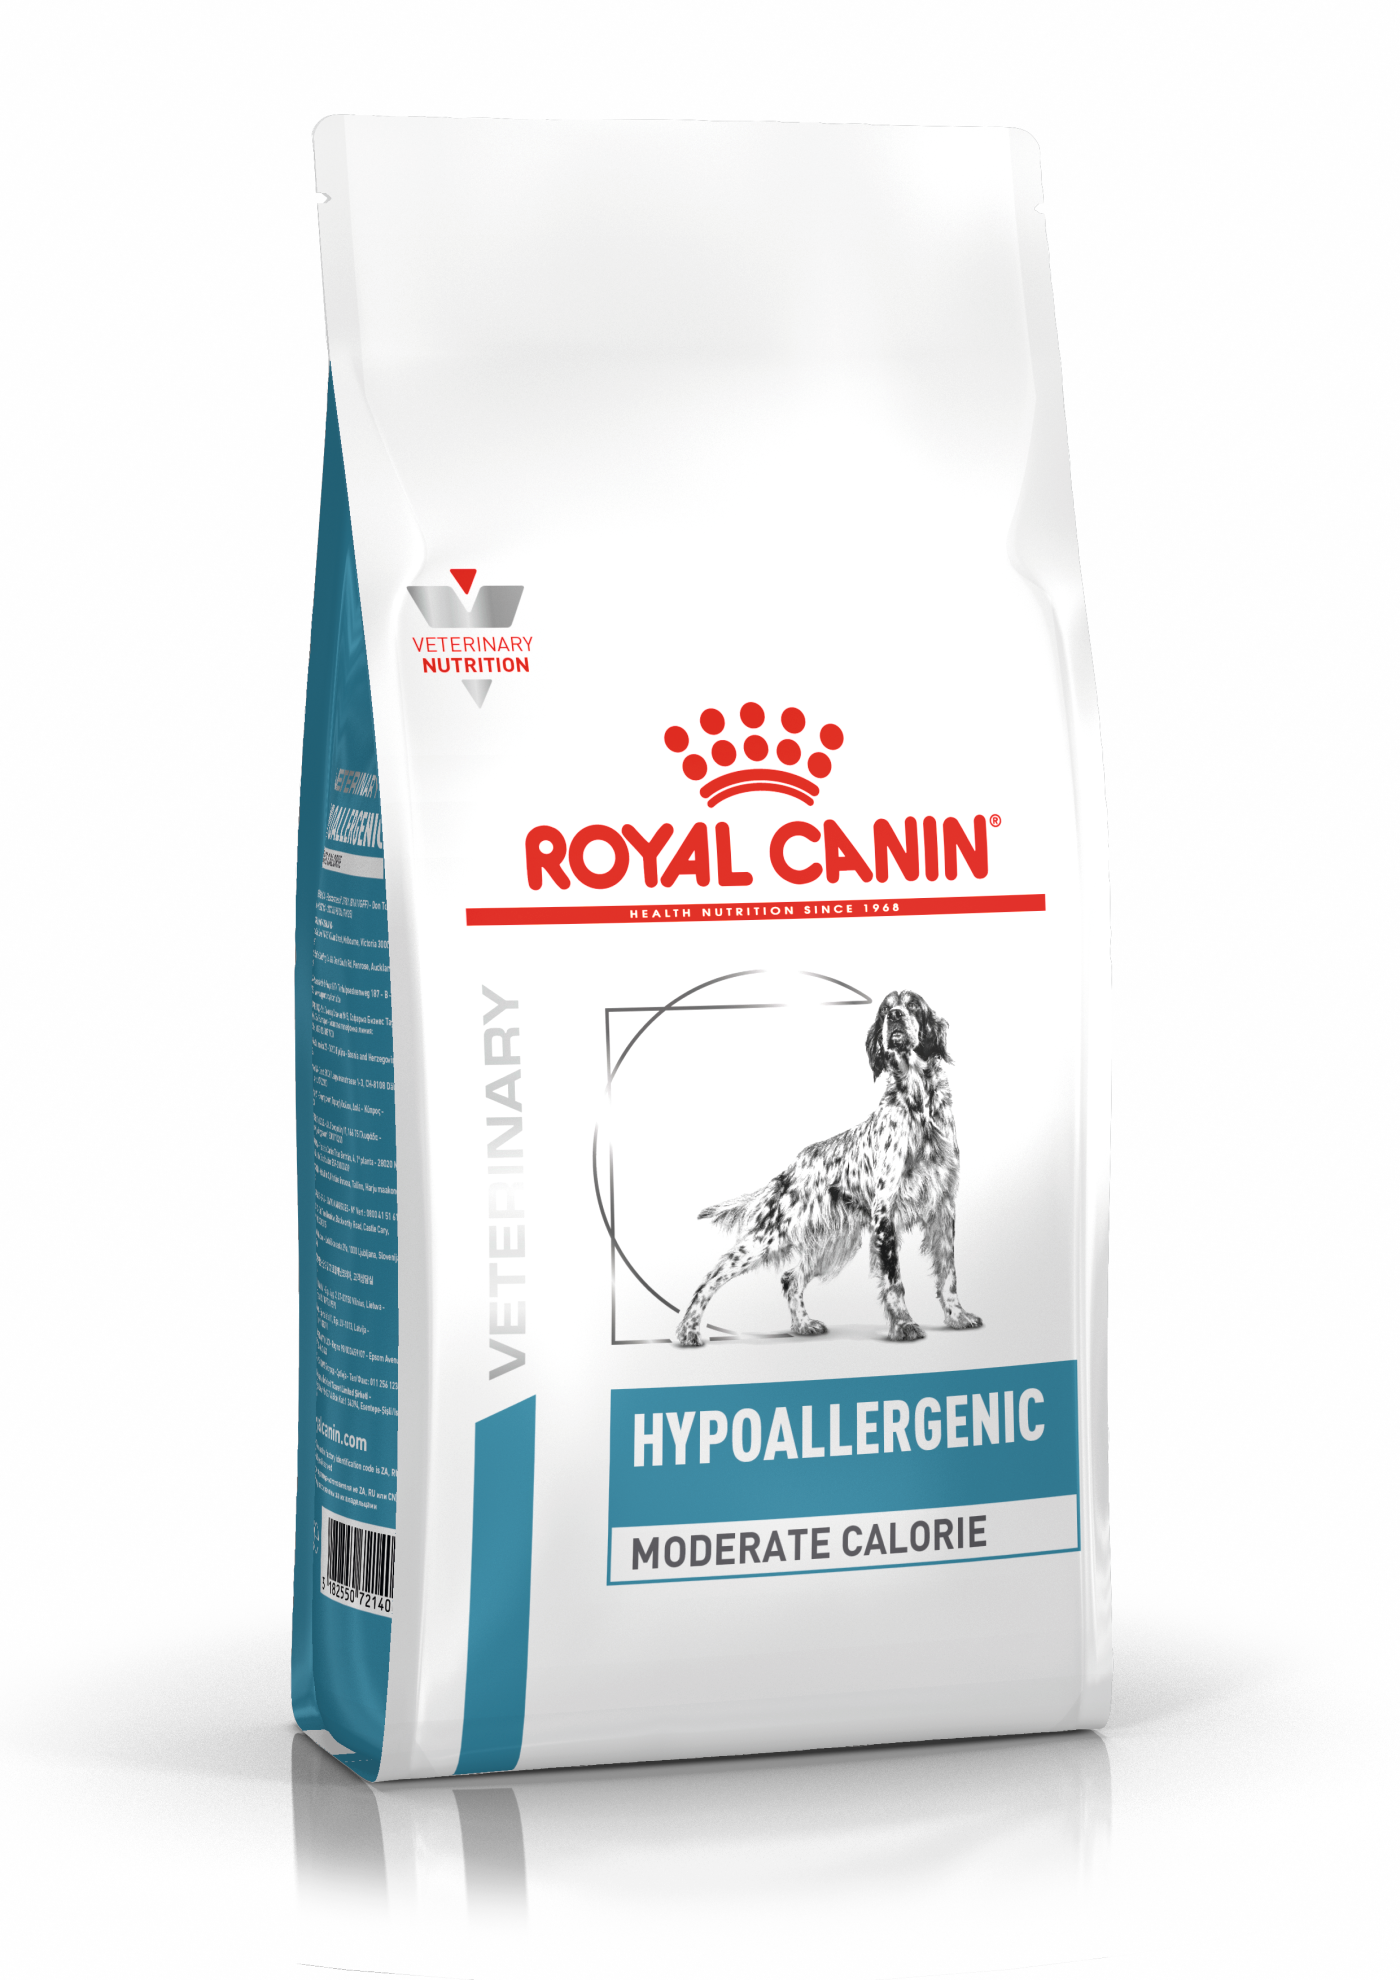 Royal Canin Hypoallergenic Moderate Calorie hond 2x 1.5 kg